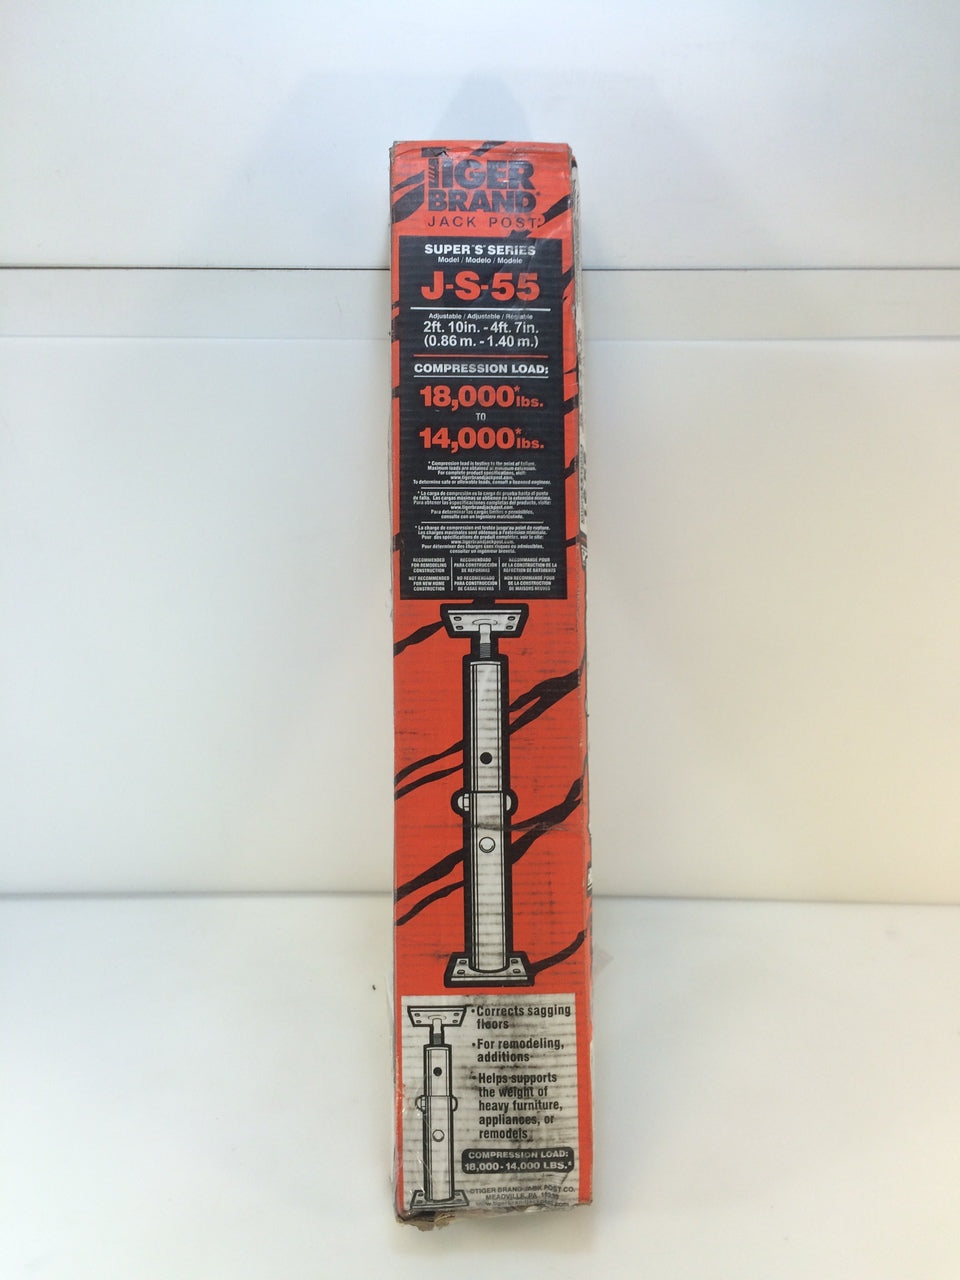 Tiger Brand J-S-55 Super S Series 2ft 10in to 4ft 7in Jack Post